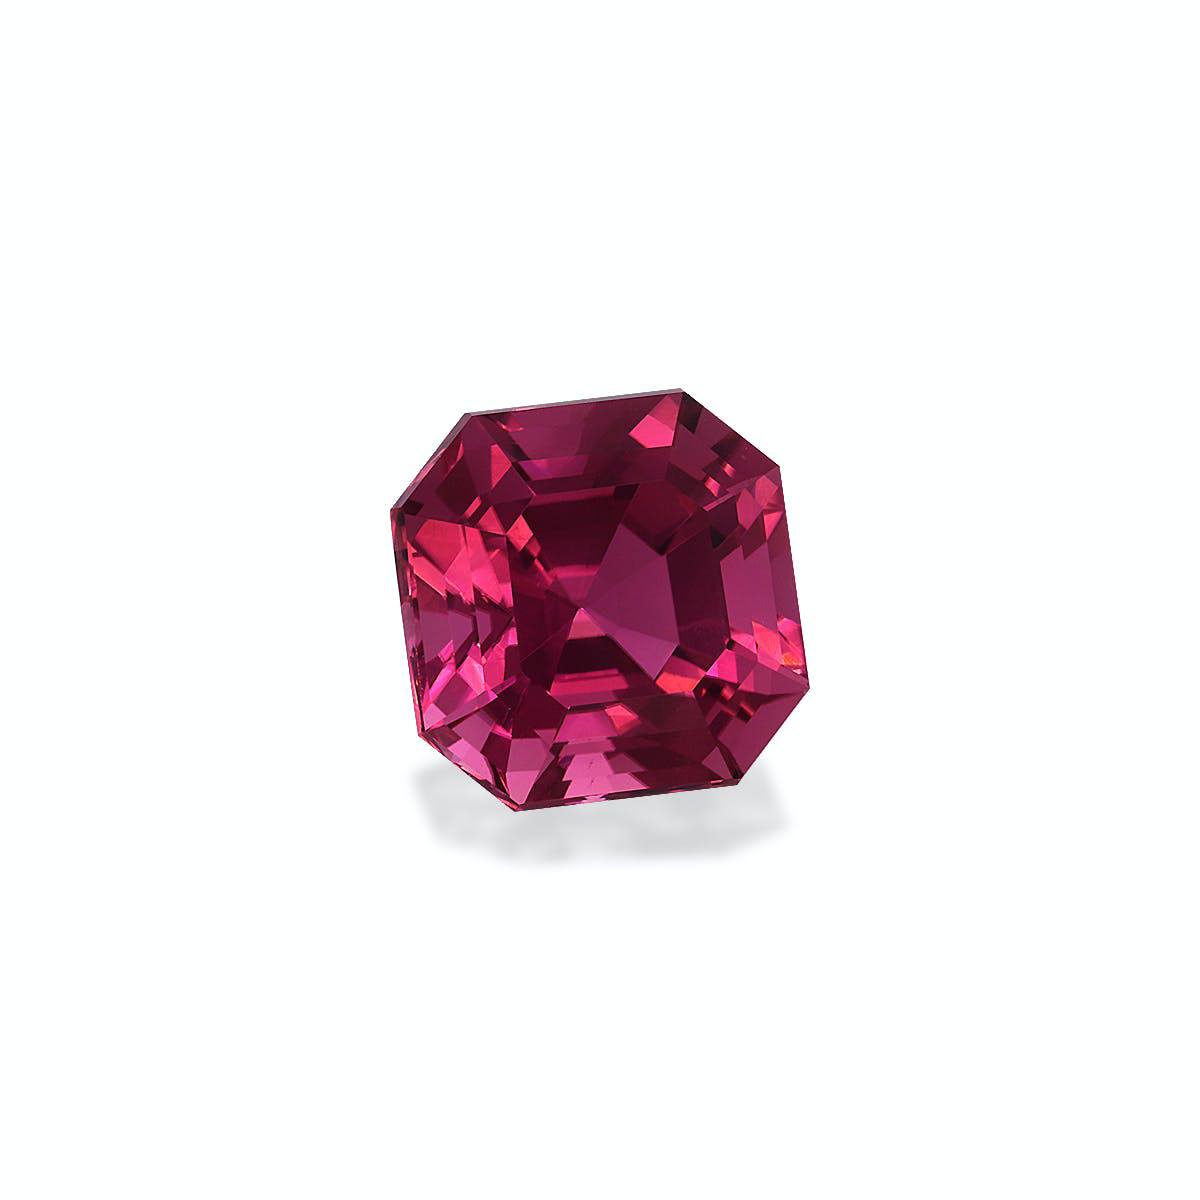 Picture of Vivid Pink Tourmaline 6.79ct - 11mm (PT1129)